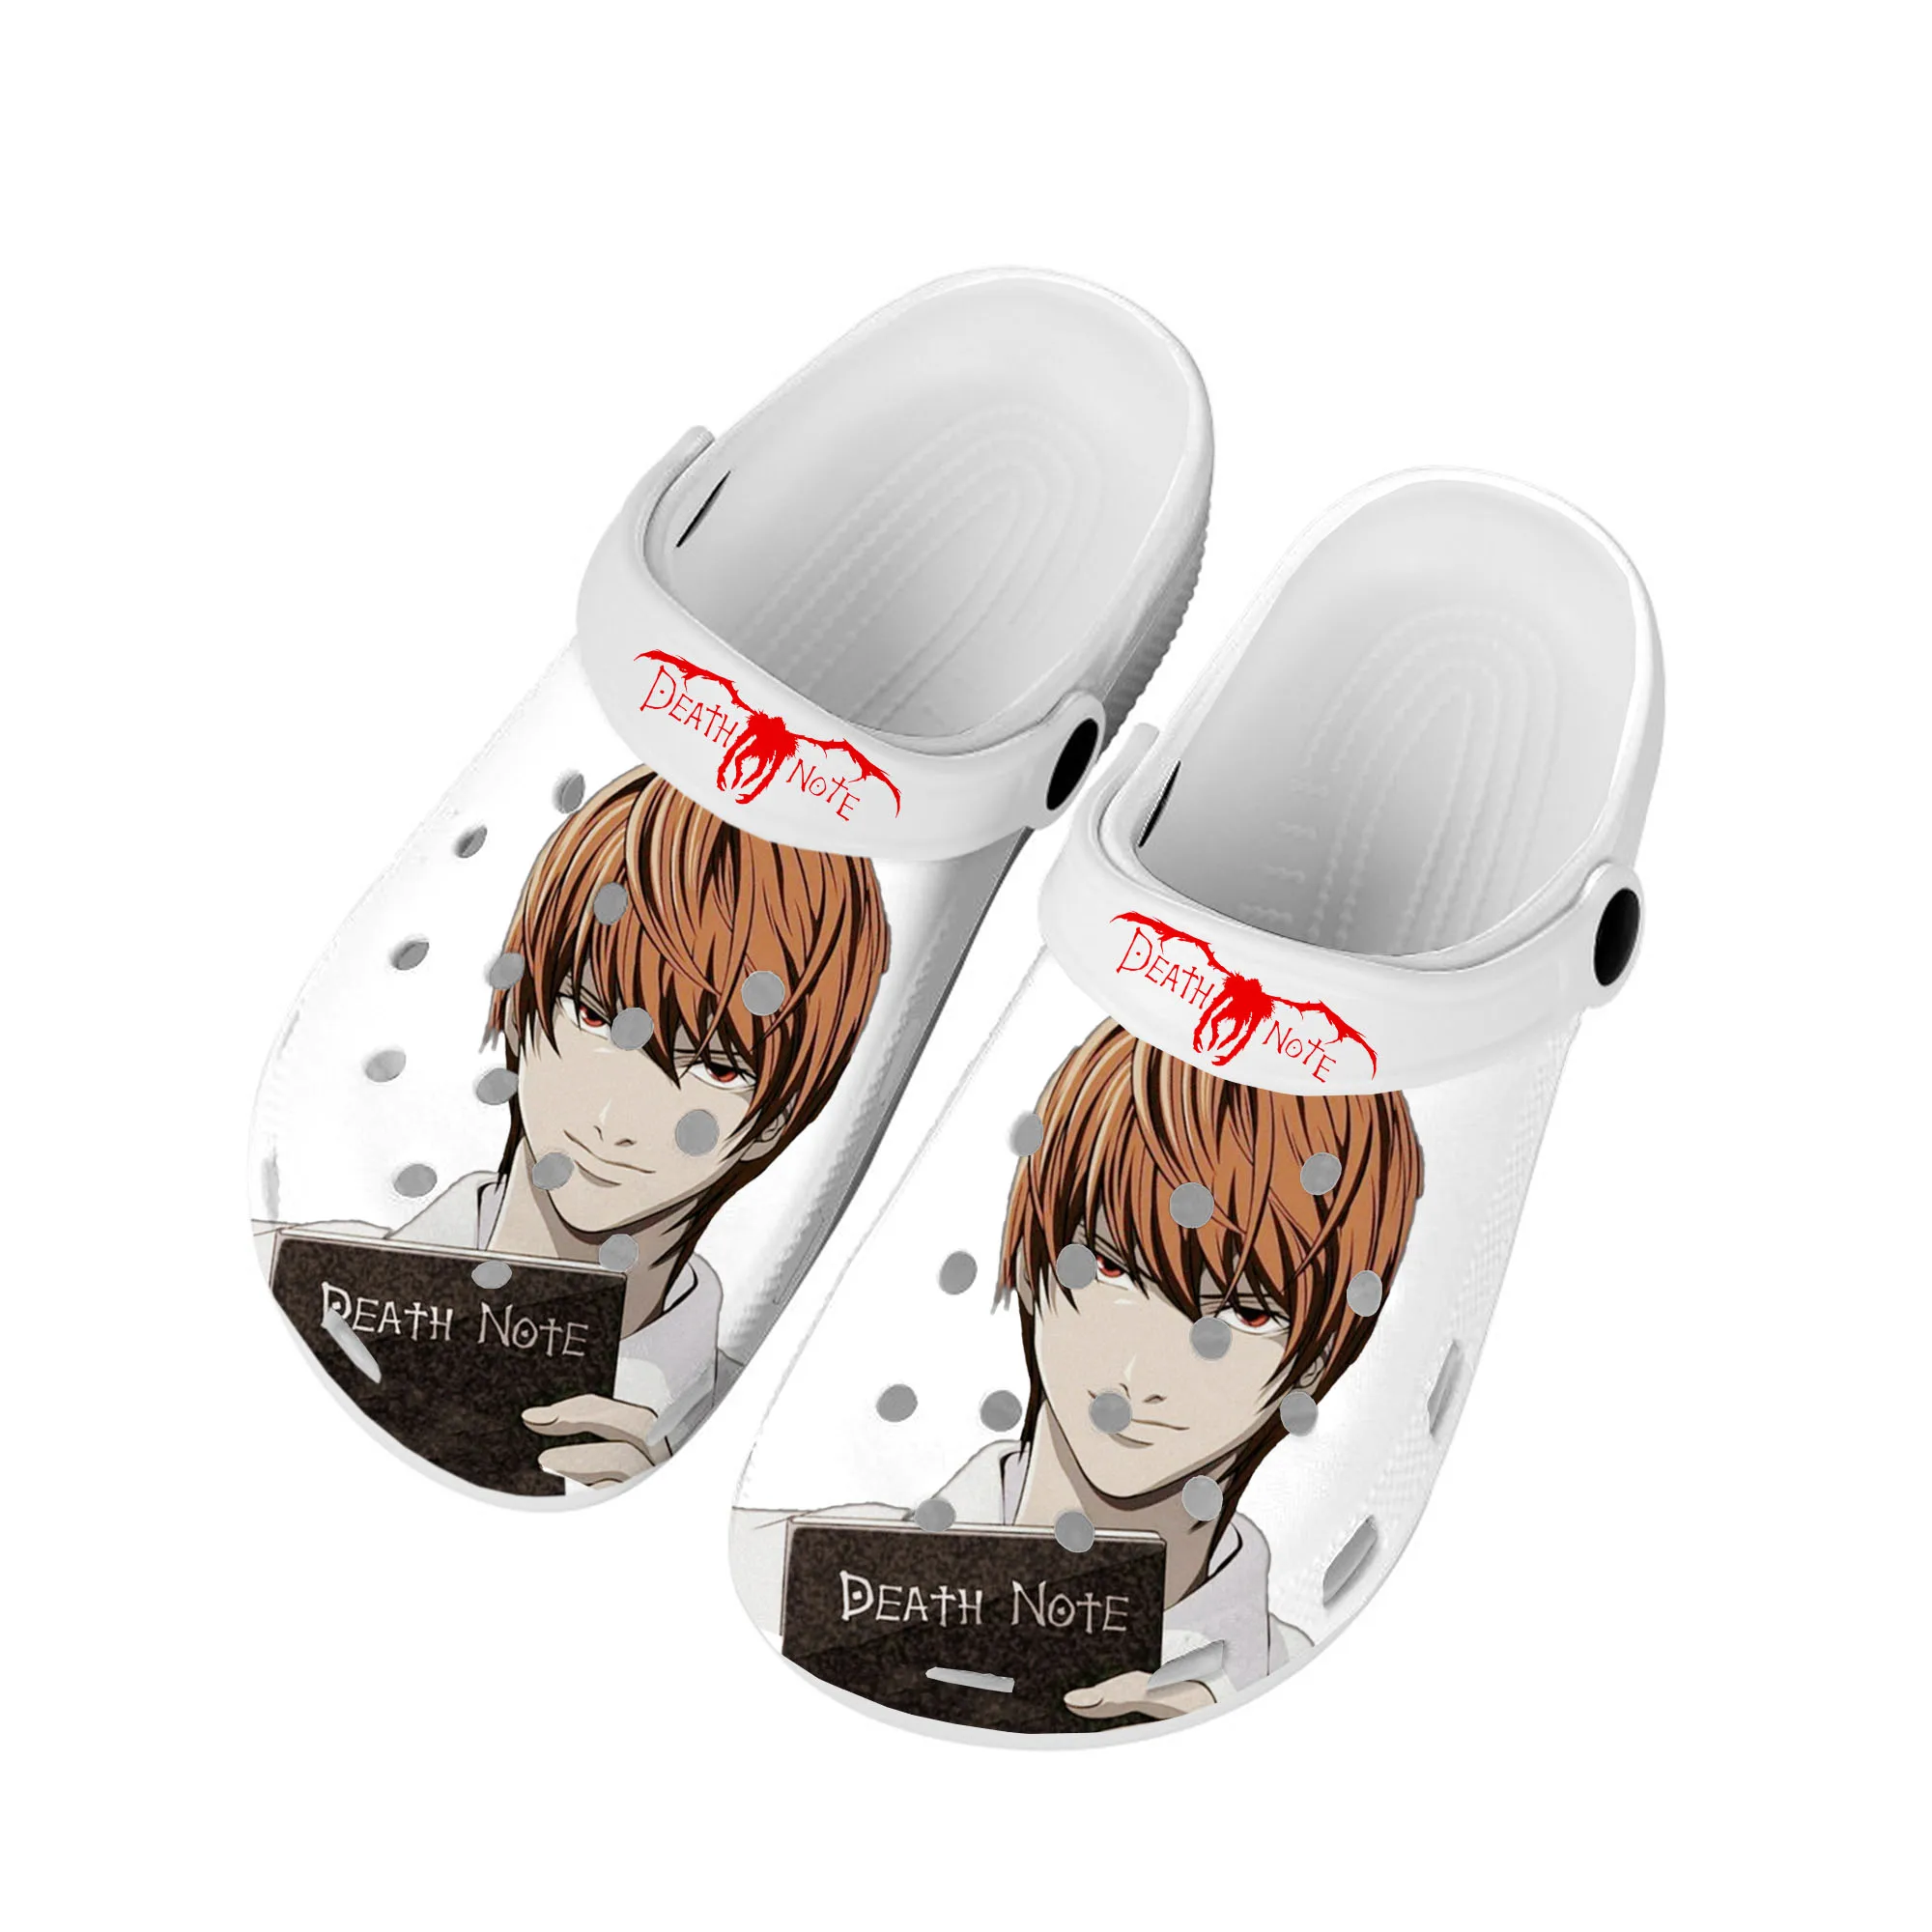 

Manga Anime Death Note Yagami Lawliet L Home Clogs Custom Water Shoes Mens Womens Teenager Shoe Garden Clog Beach Hole Slippers